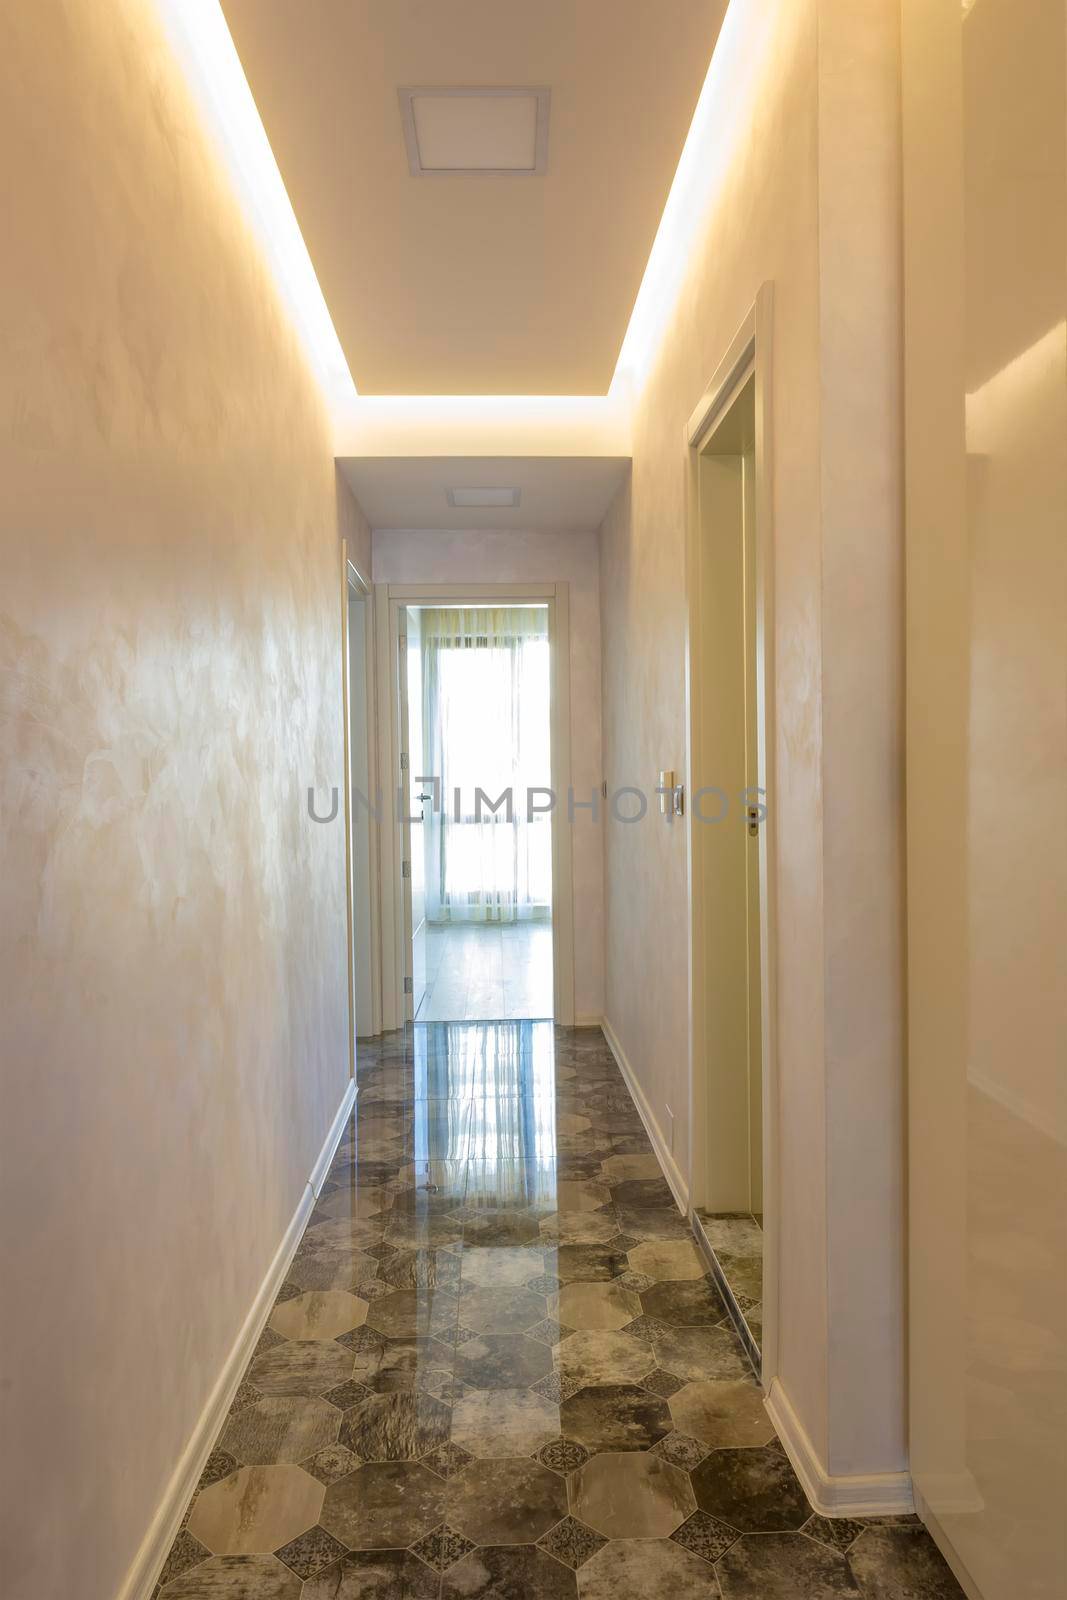 new home corridor with an open door at the end and ceramic tiles